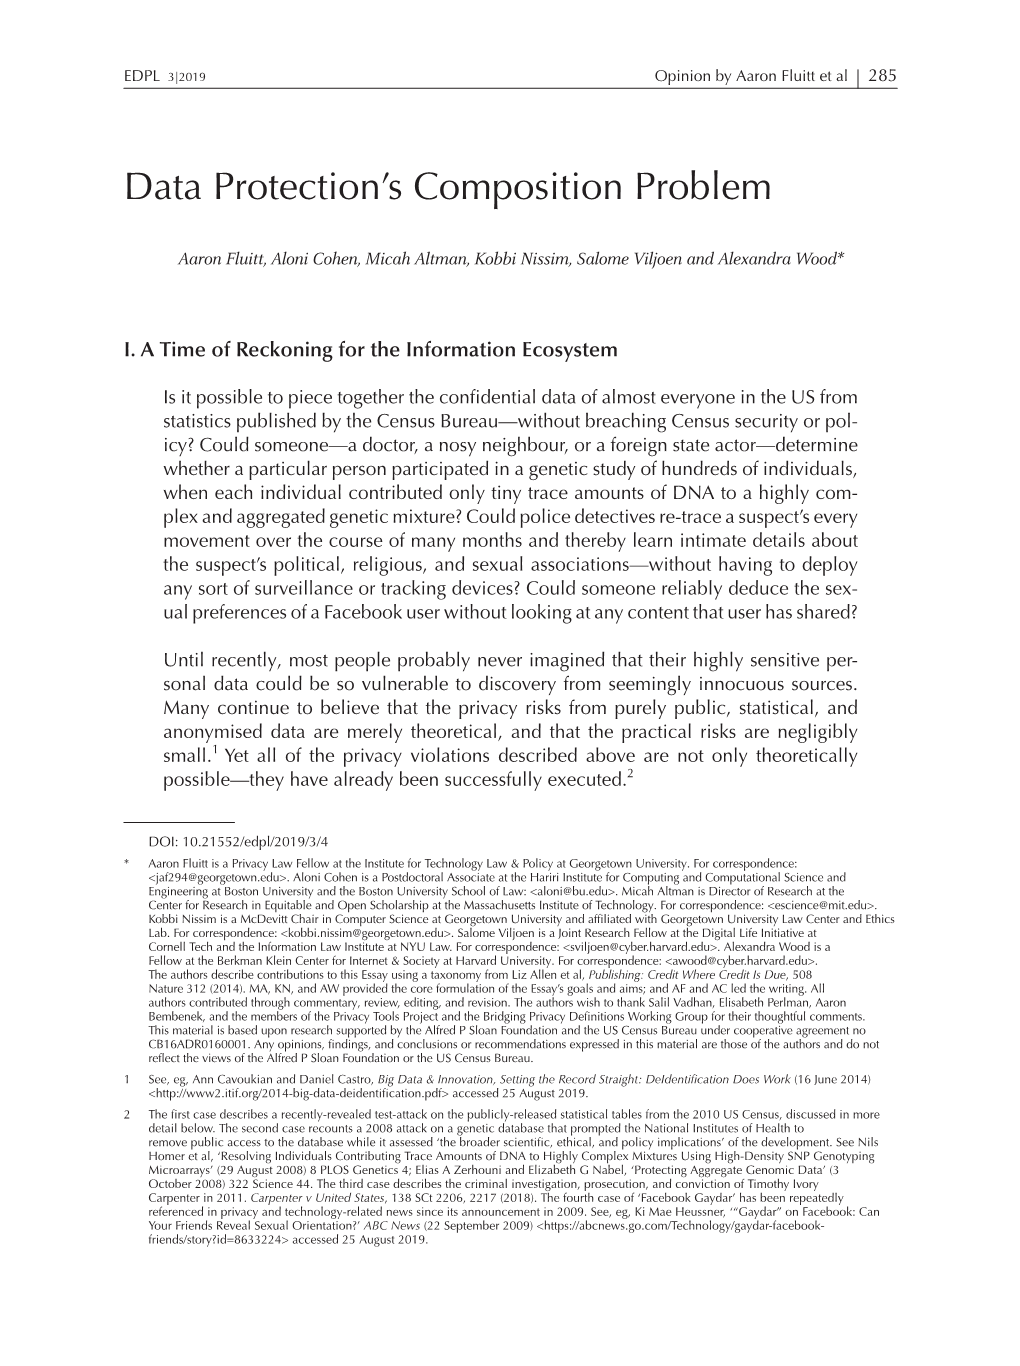 Opinions ∙ Data Protection's Composition Problem